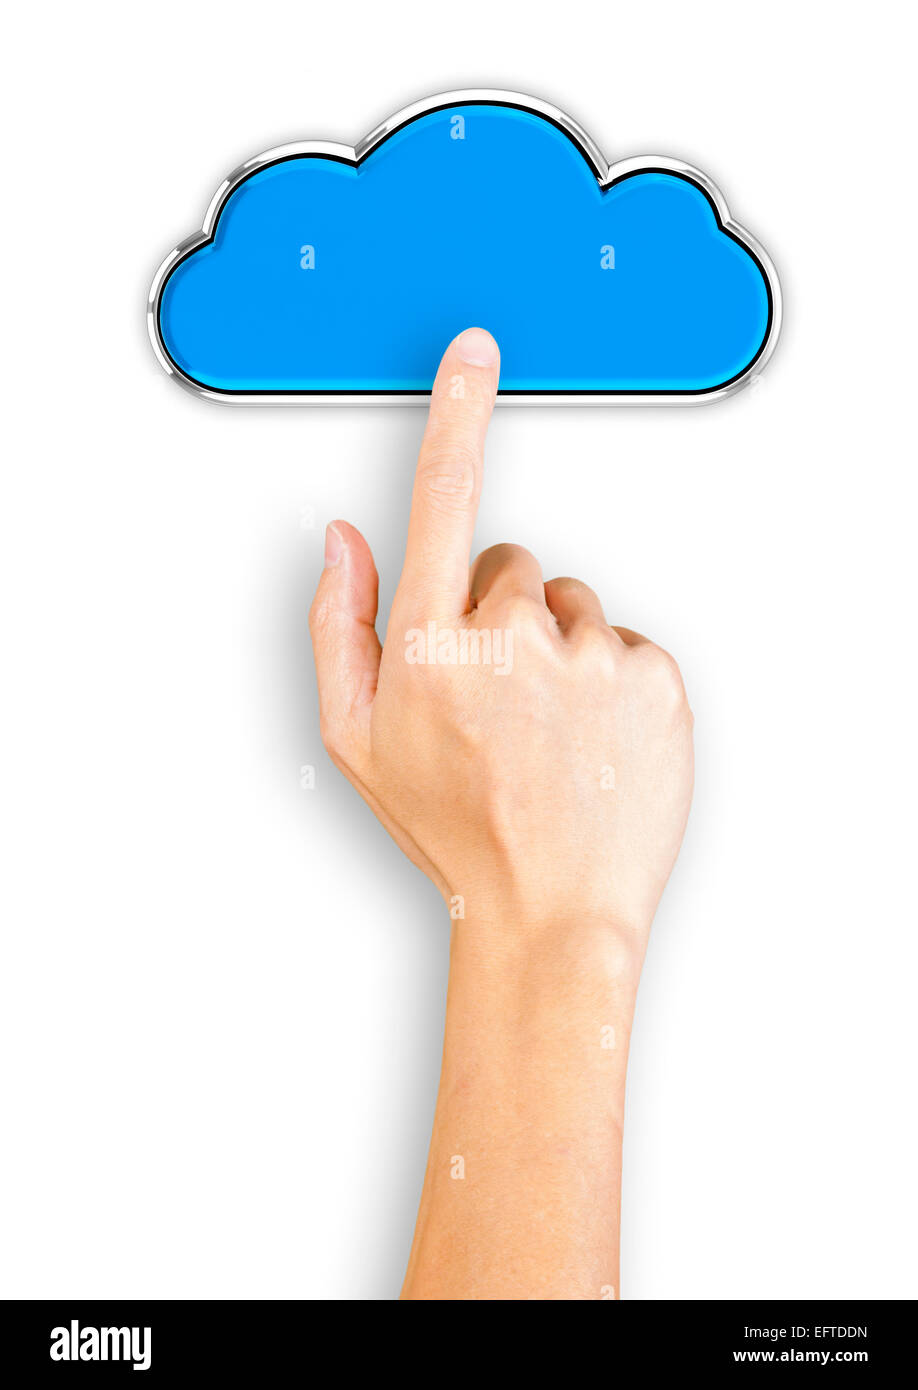 Hand clicking a blue cloud shaped button, top view Stock Photo